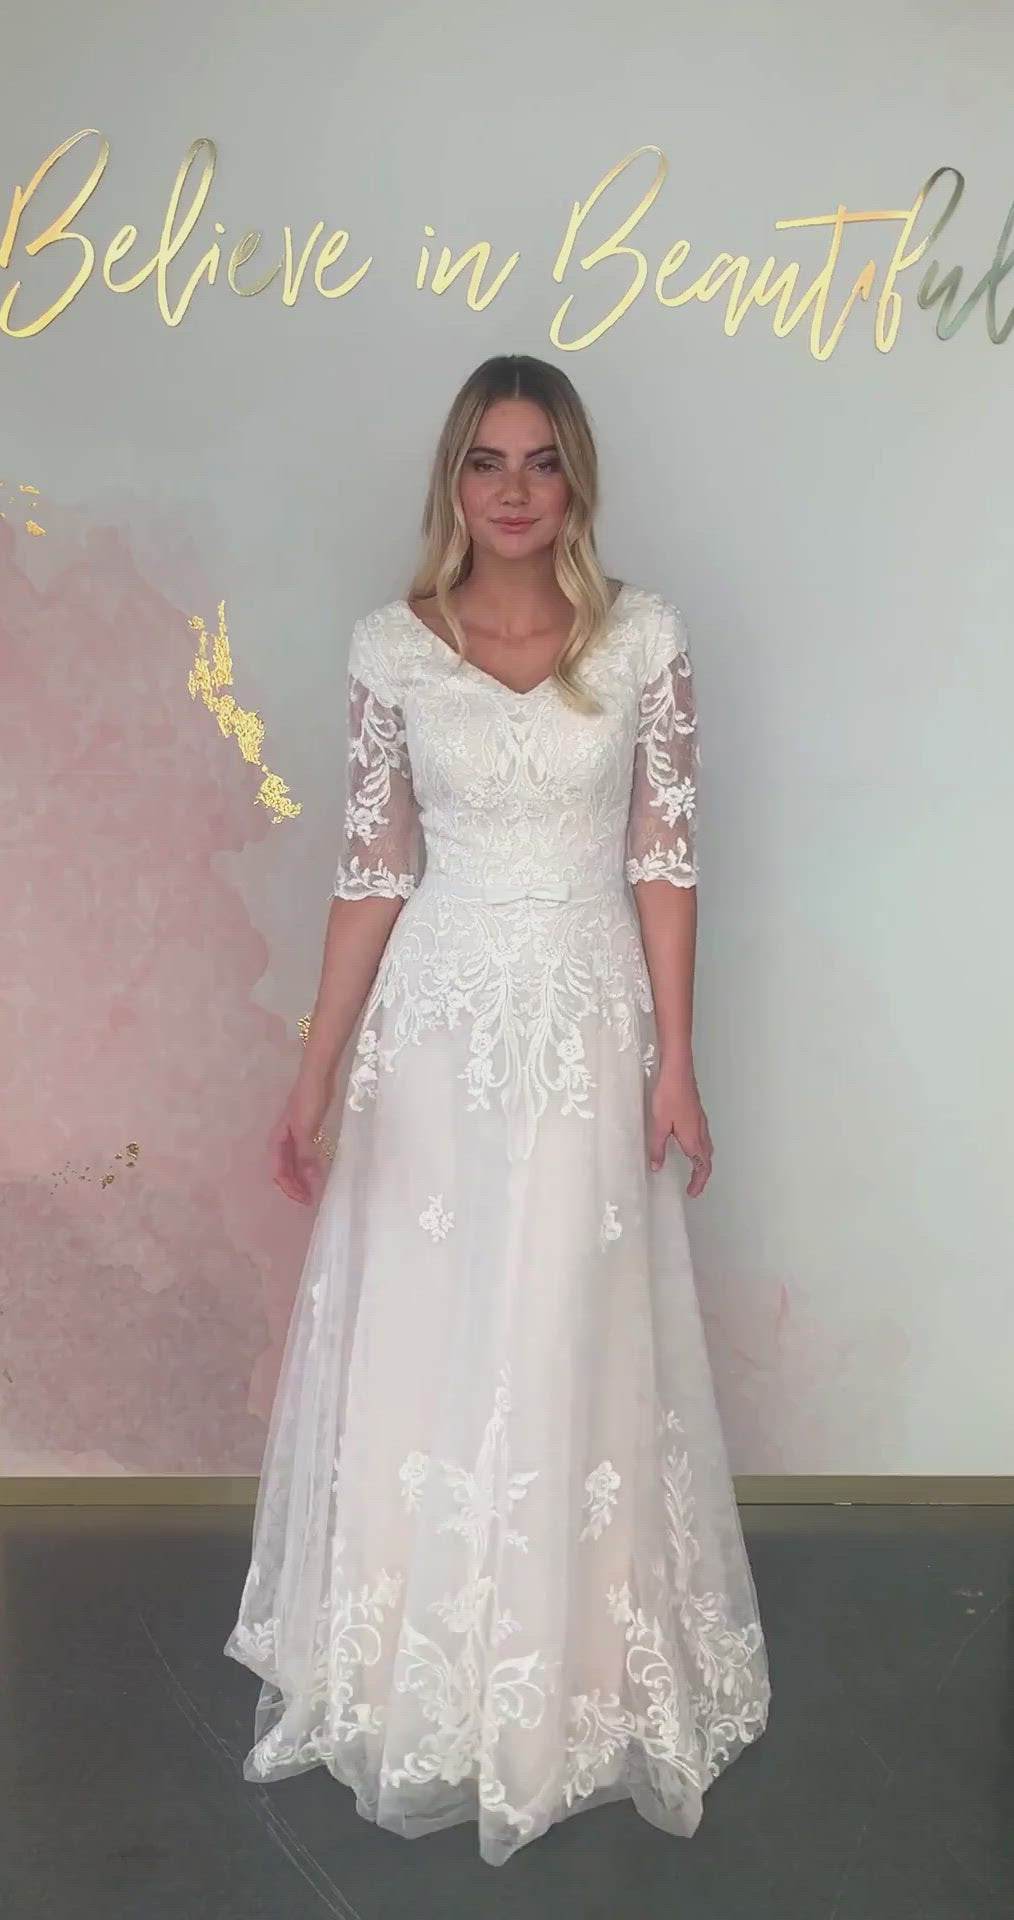 A video featuring our Alice wedding dress and its beautiful A-line silhouette, lace applique detailing, and dainty bow at the waist.